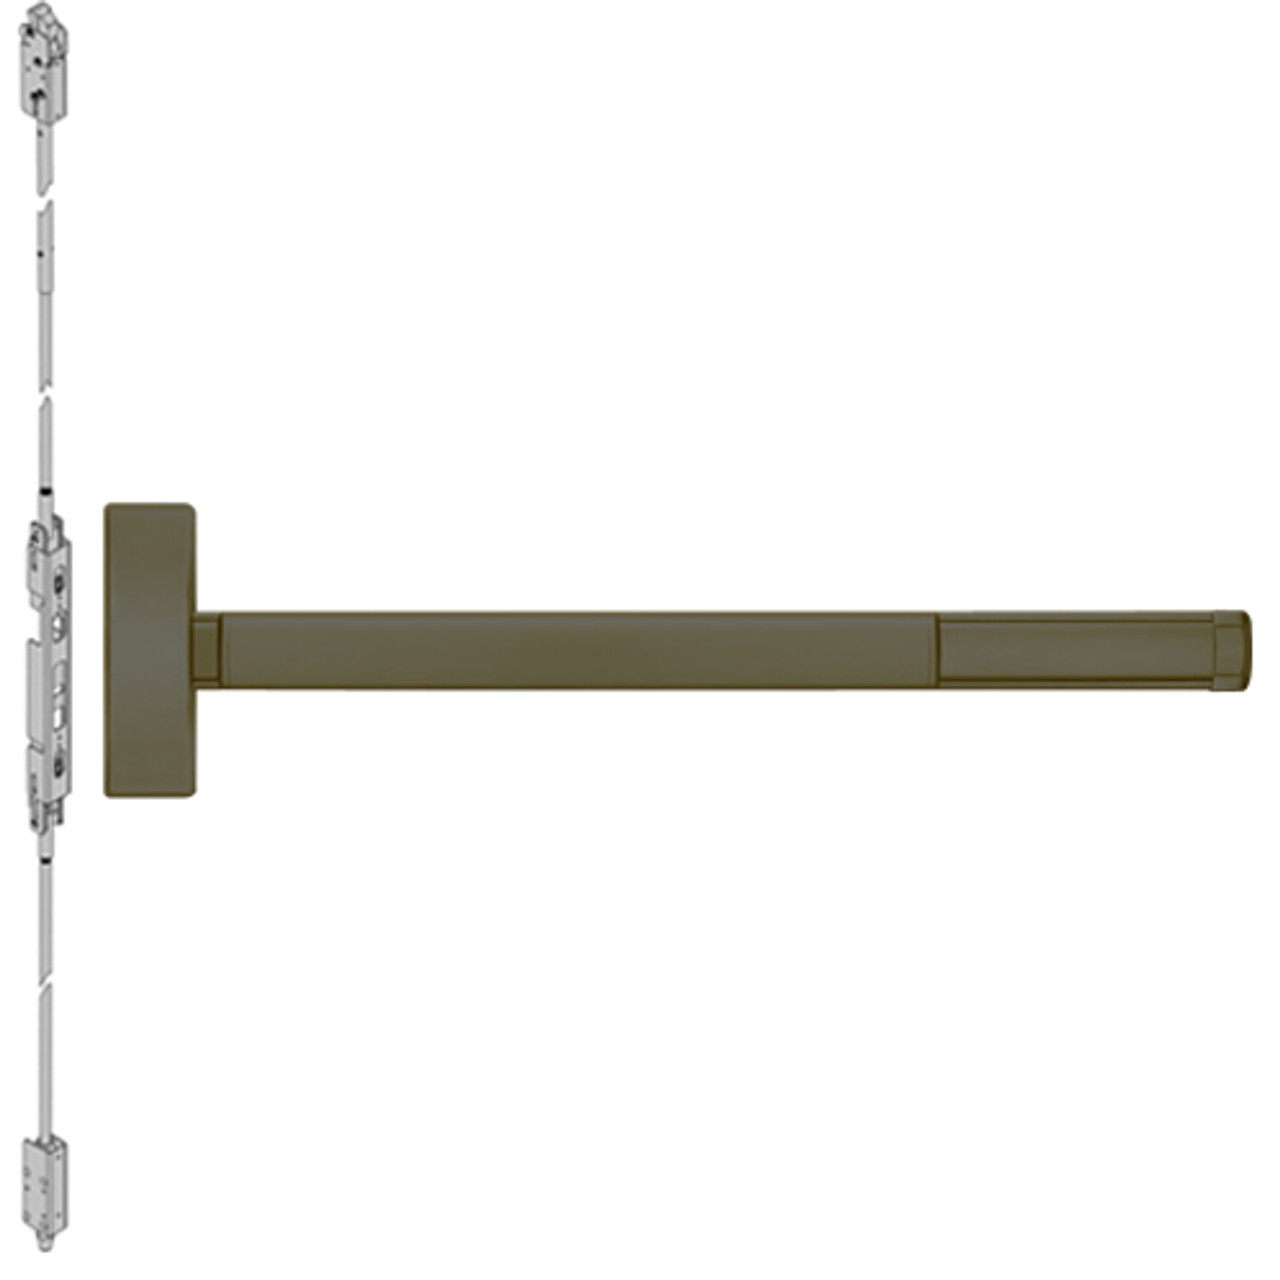 ELR2815-613-48 PHI 2800 Series Concealed Vertical Rod Exit Device with Electric Latch Retraction Prepped for Thumbpiece Always Active in Oil Rubbed Bronze Finish